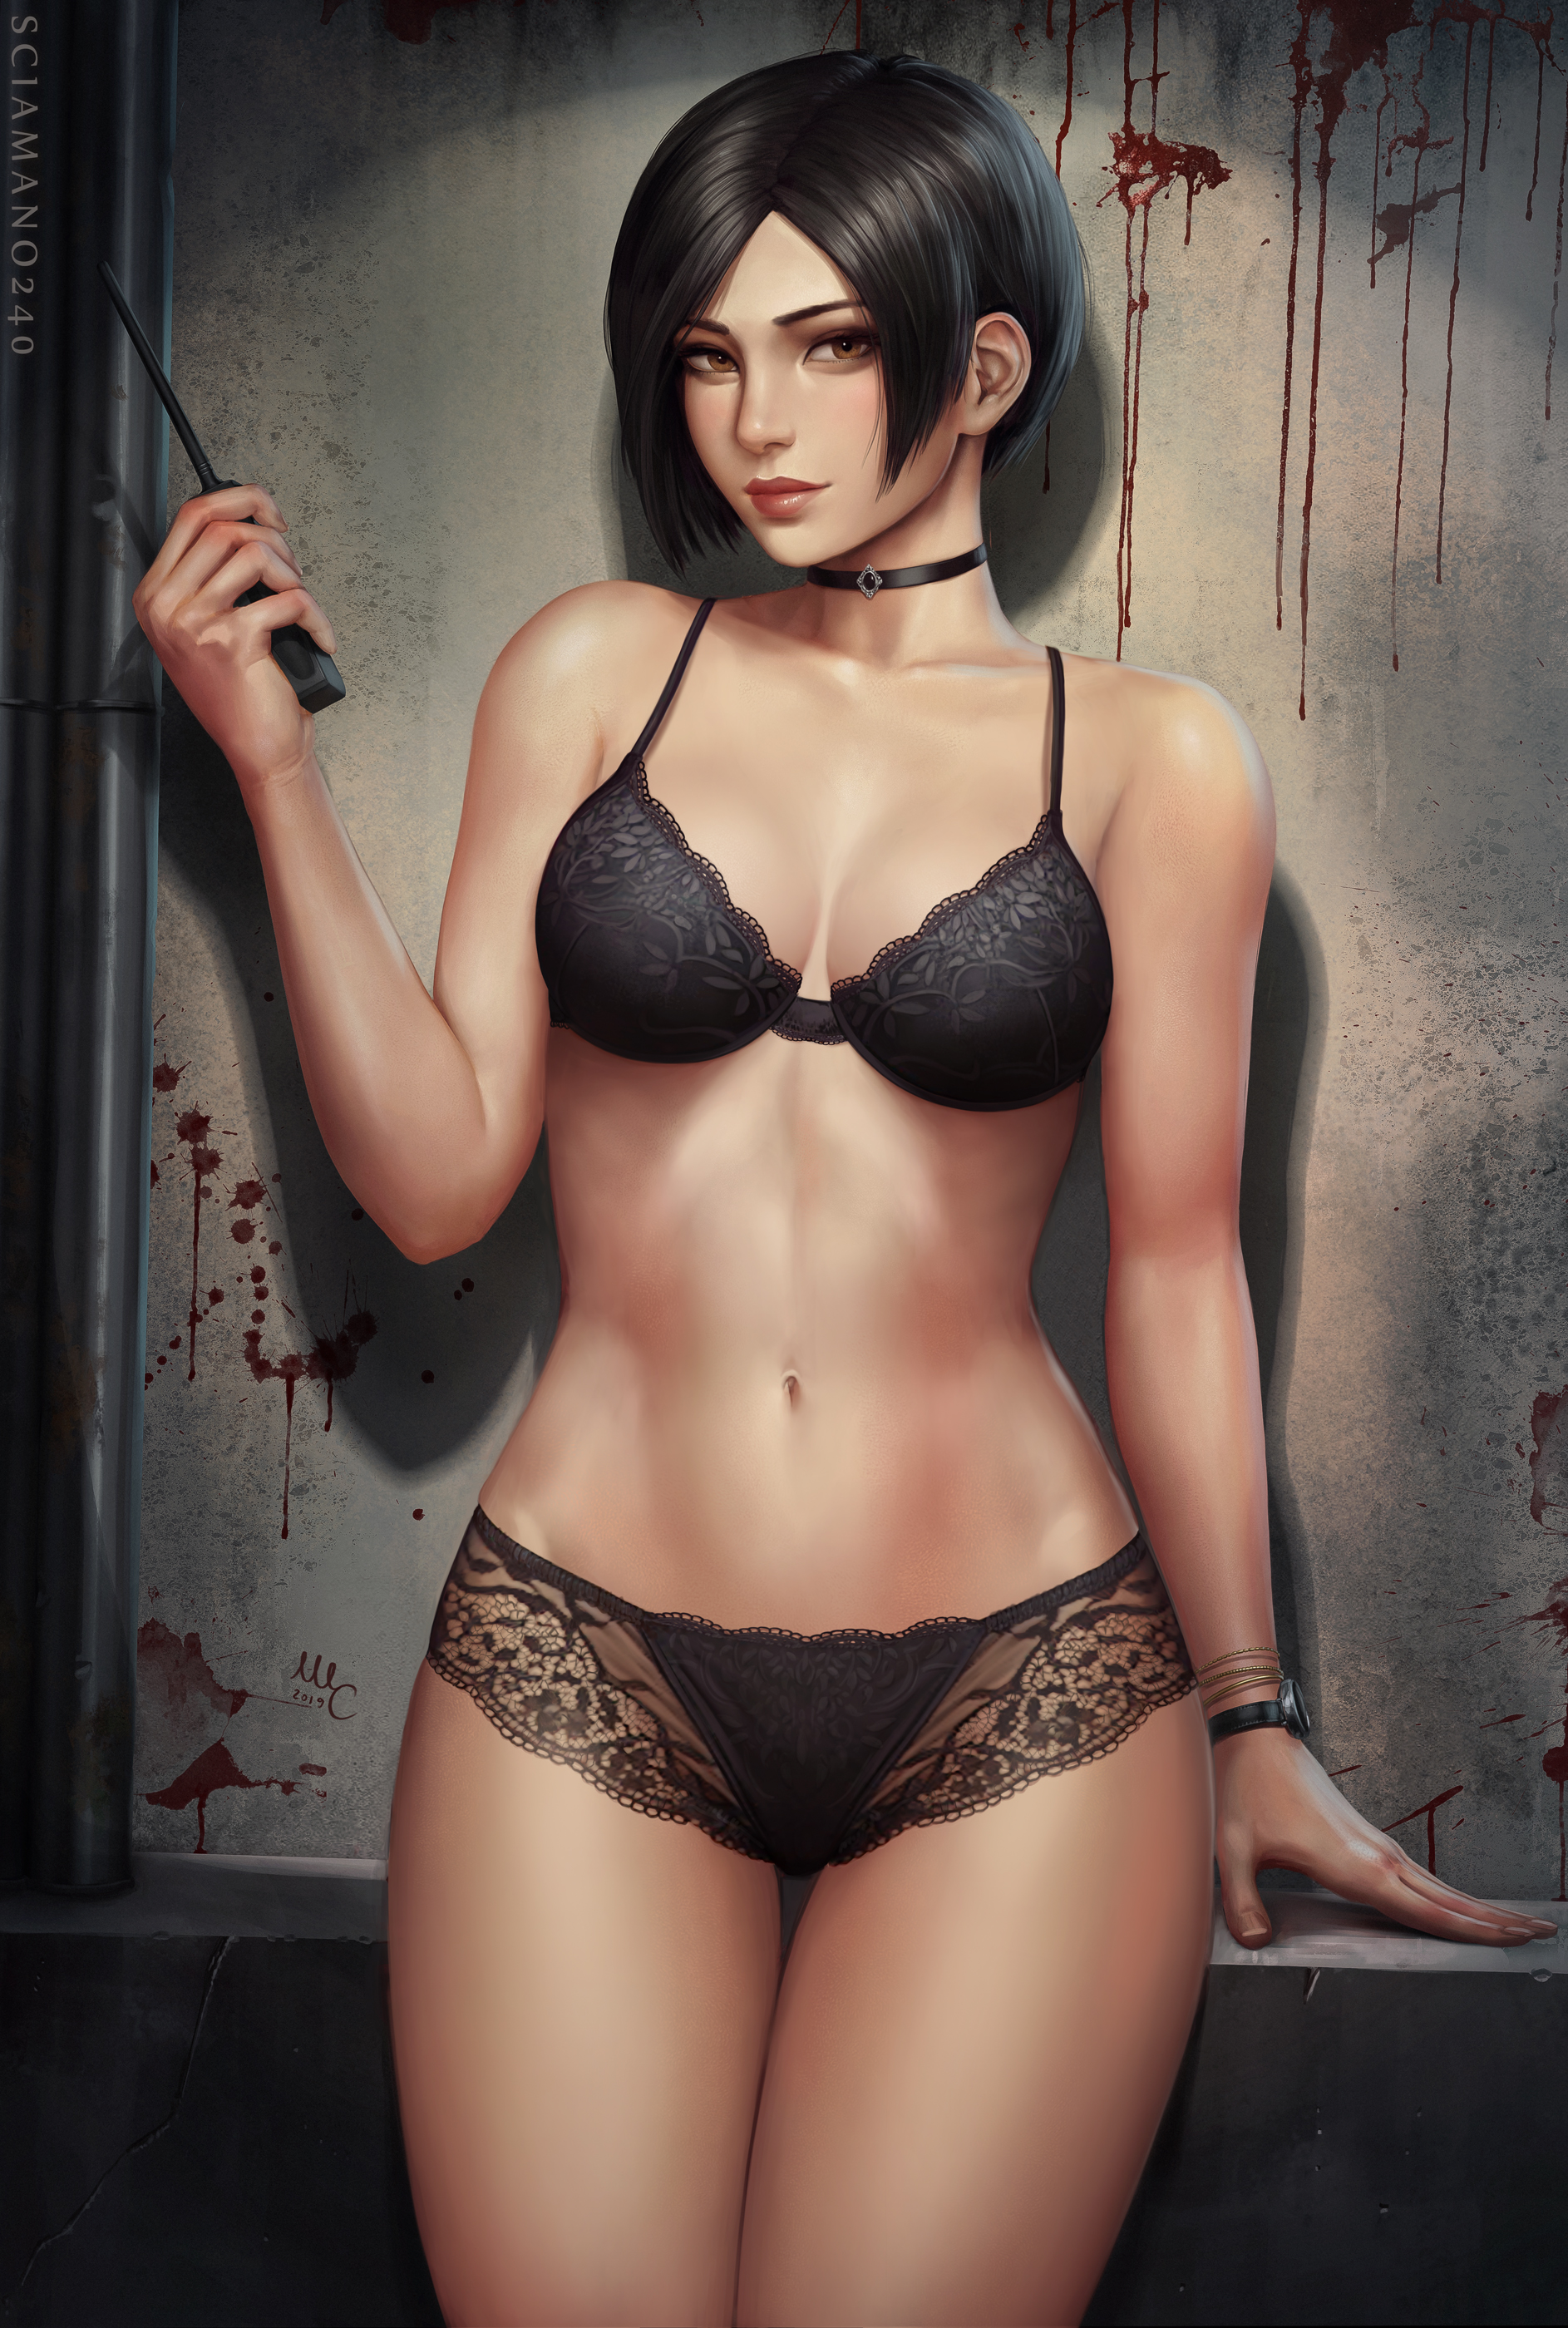 General 1886x2800 artwork illustration digital art fan art drawing video games video game girls video game characters Ada Wong Resident Evil lingerie belly short hair black hair looking at viewer choker the gap cleavage Mirco Cabbia